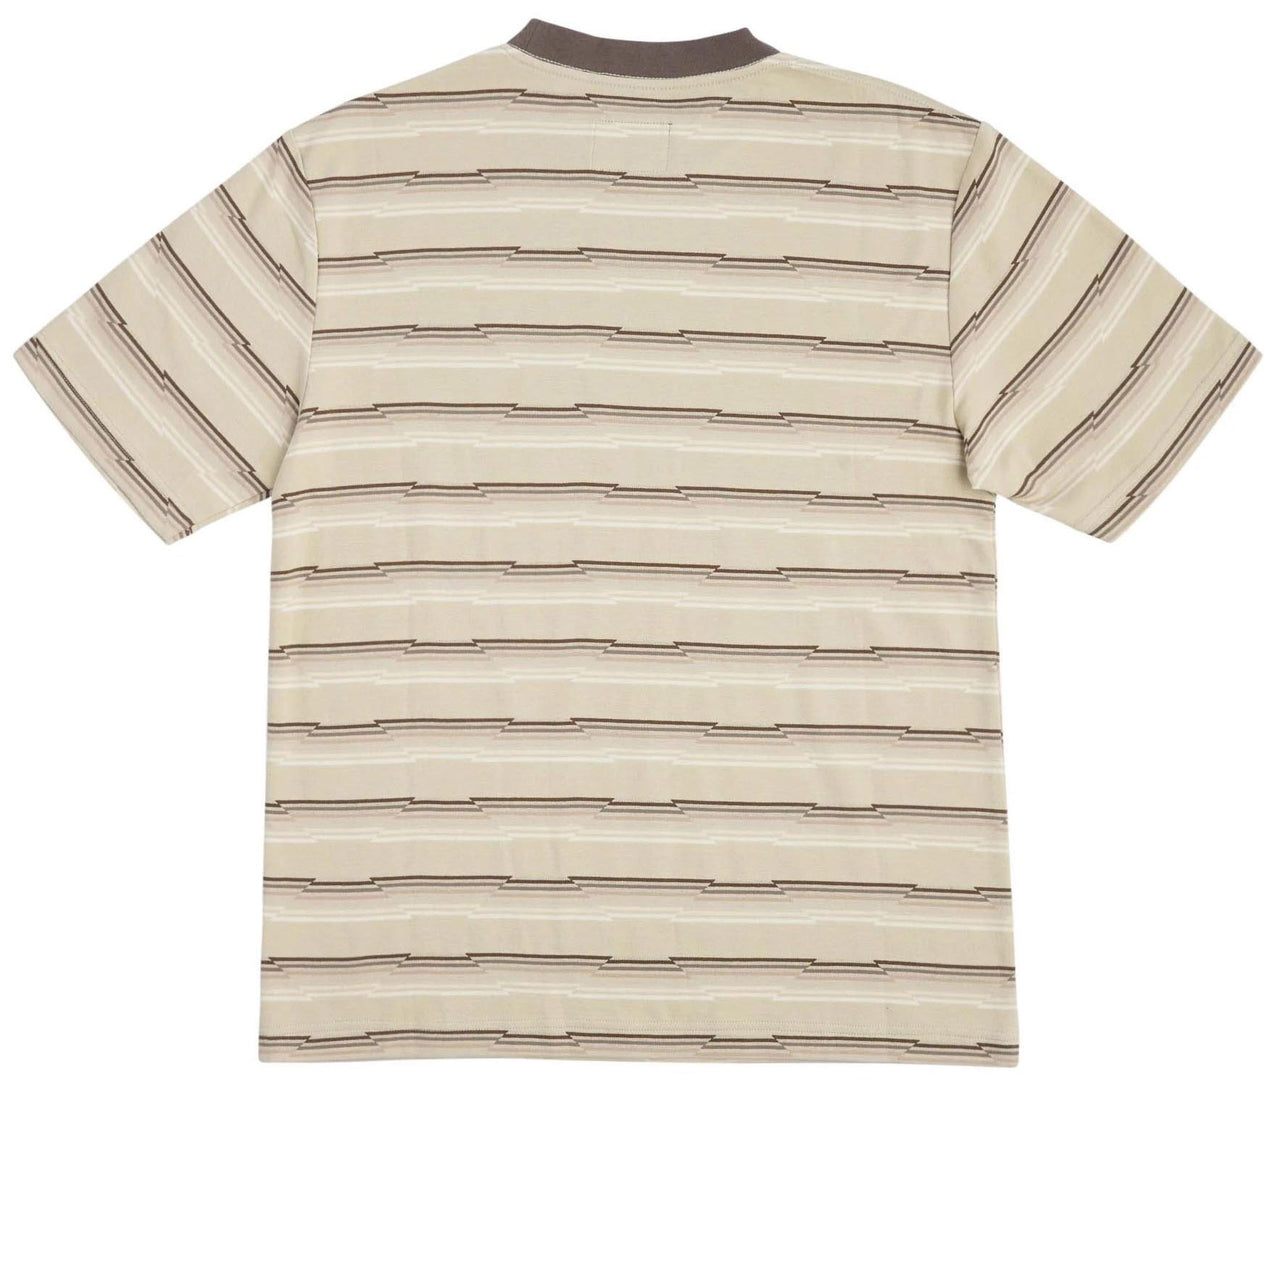 Independent Wired Ringer T-Shirt - Sand Stripe image 2